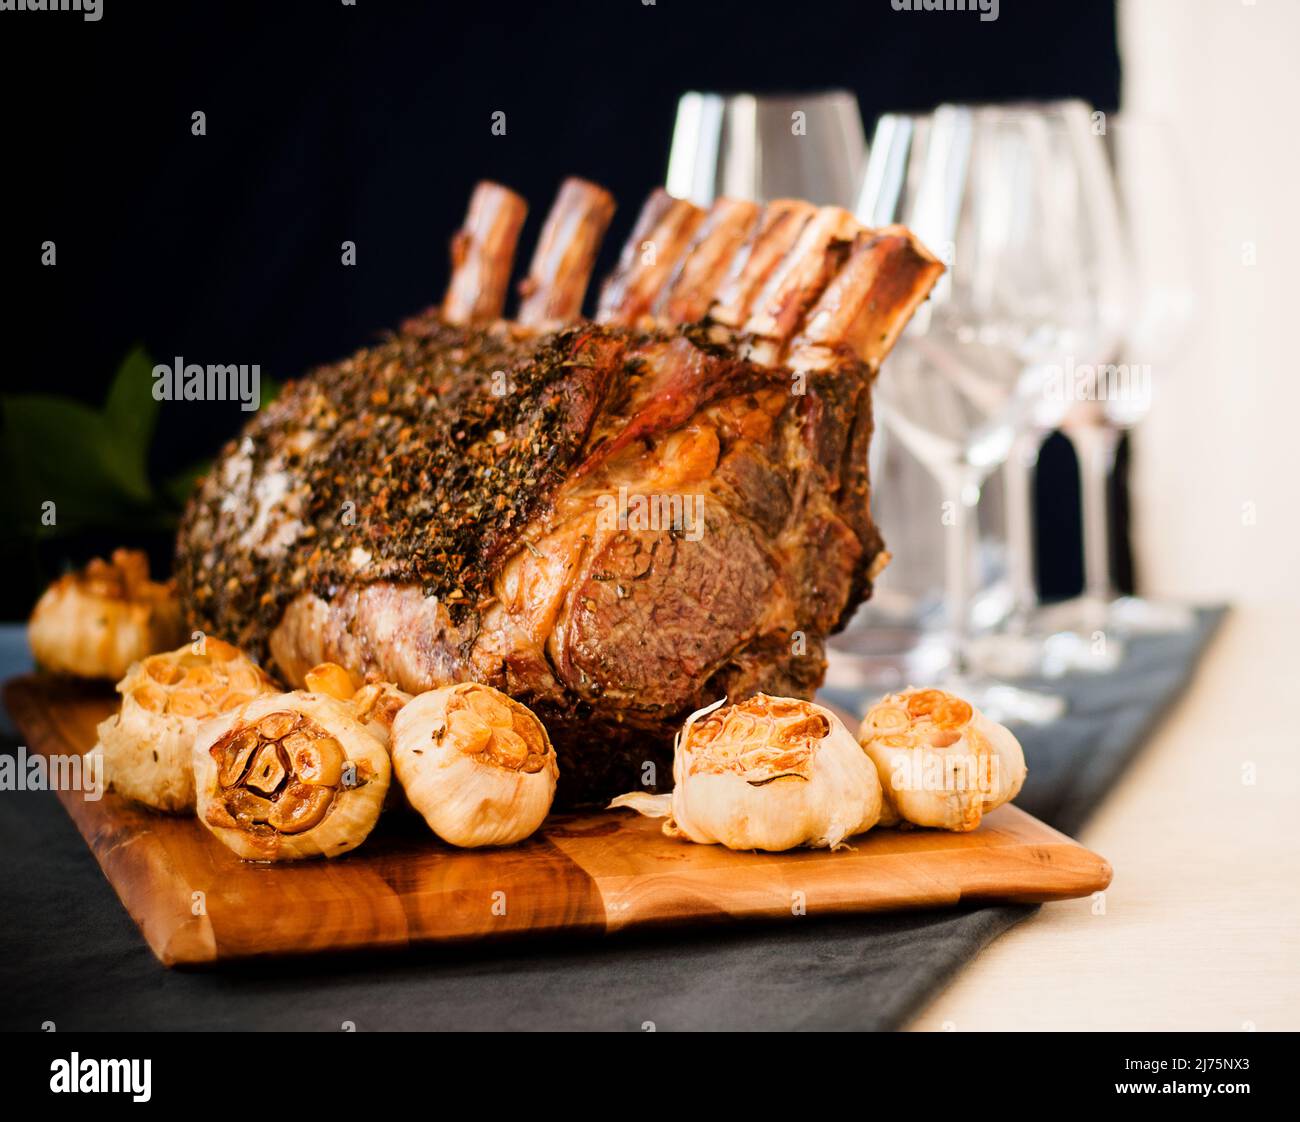 Dry Aged Frenched Prime Rib Roast with Whole Bulbs of Garlic Stock Photo